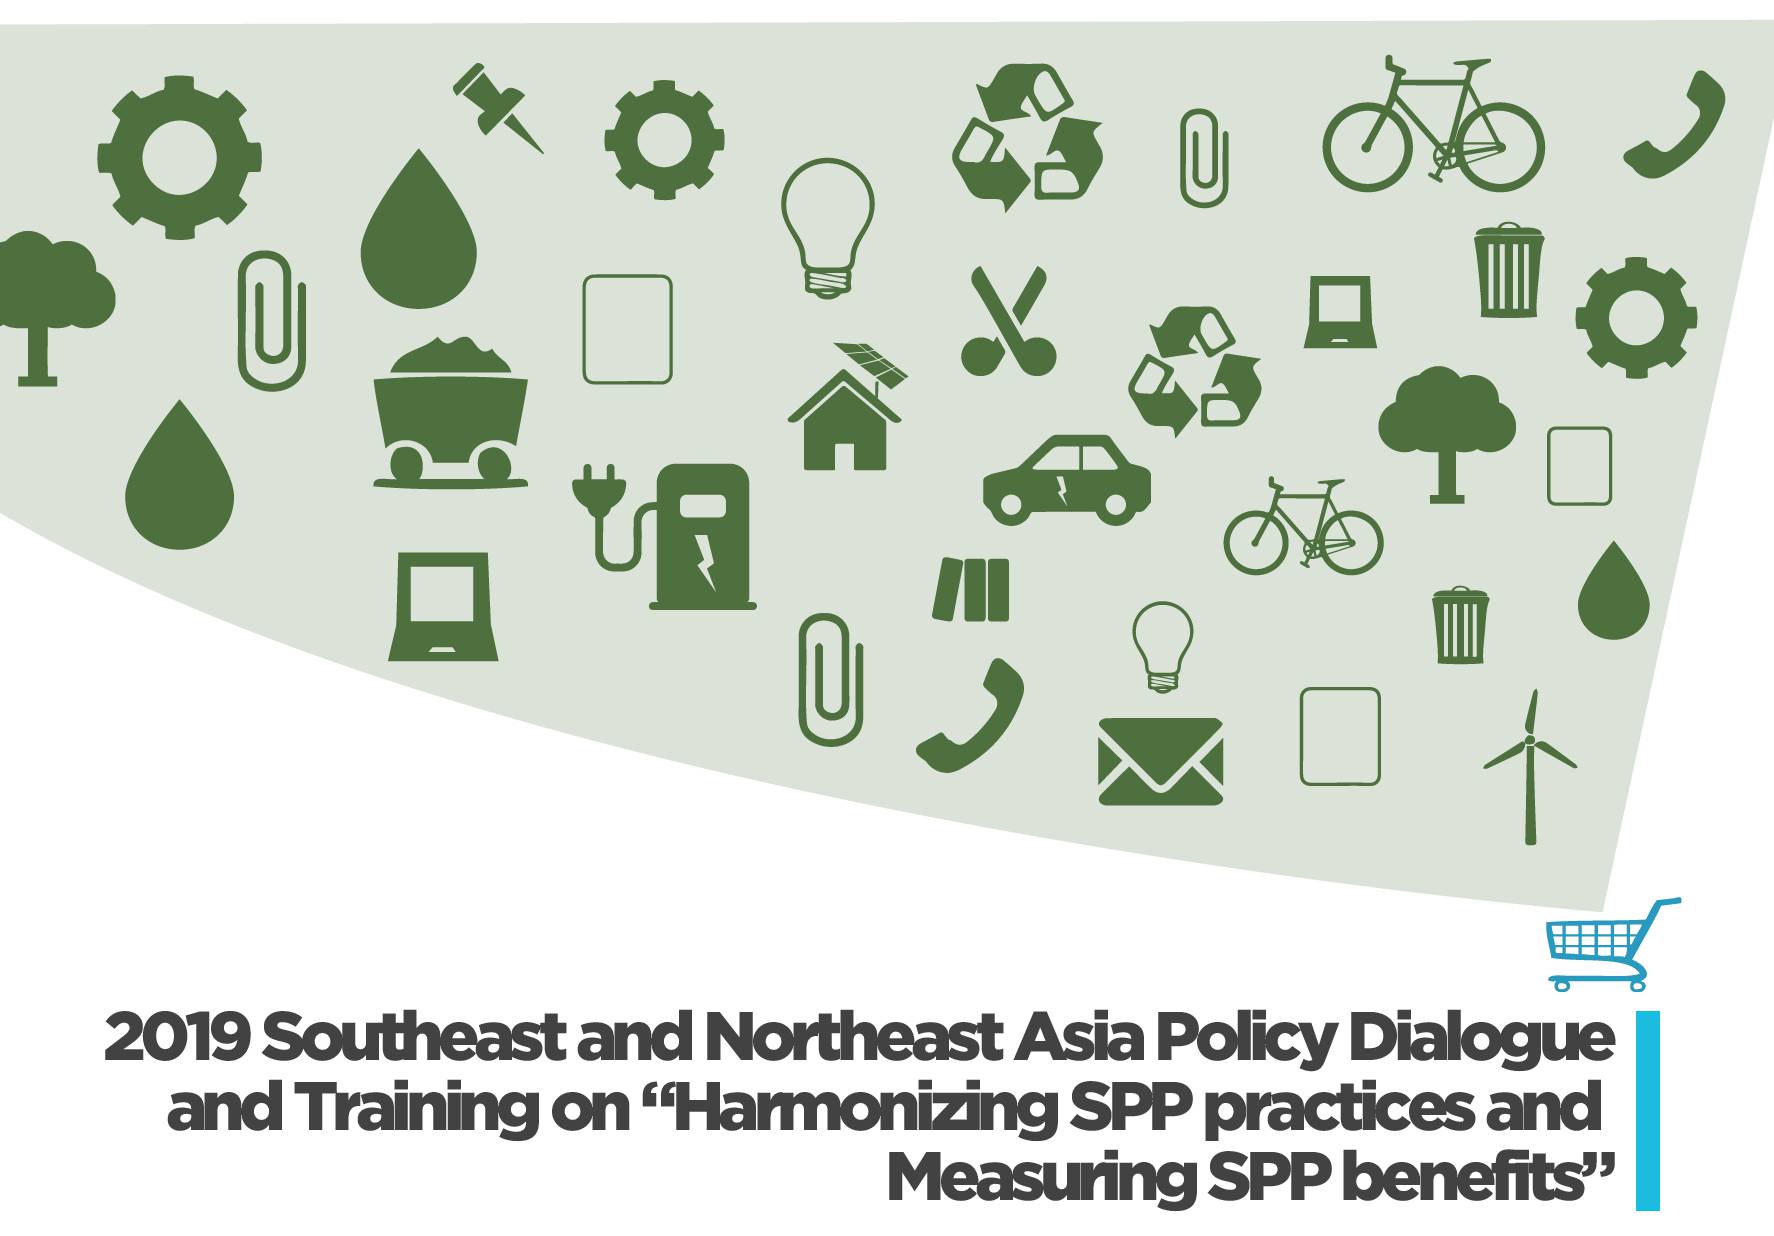 2019 Southeast and Northeast Asia Policy Dialogue and Training on “Harmonizing SPP practices and Measuring SPP benefits”